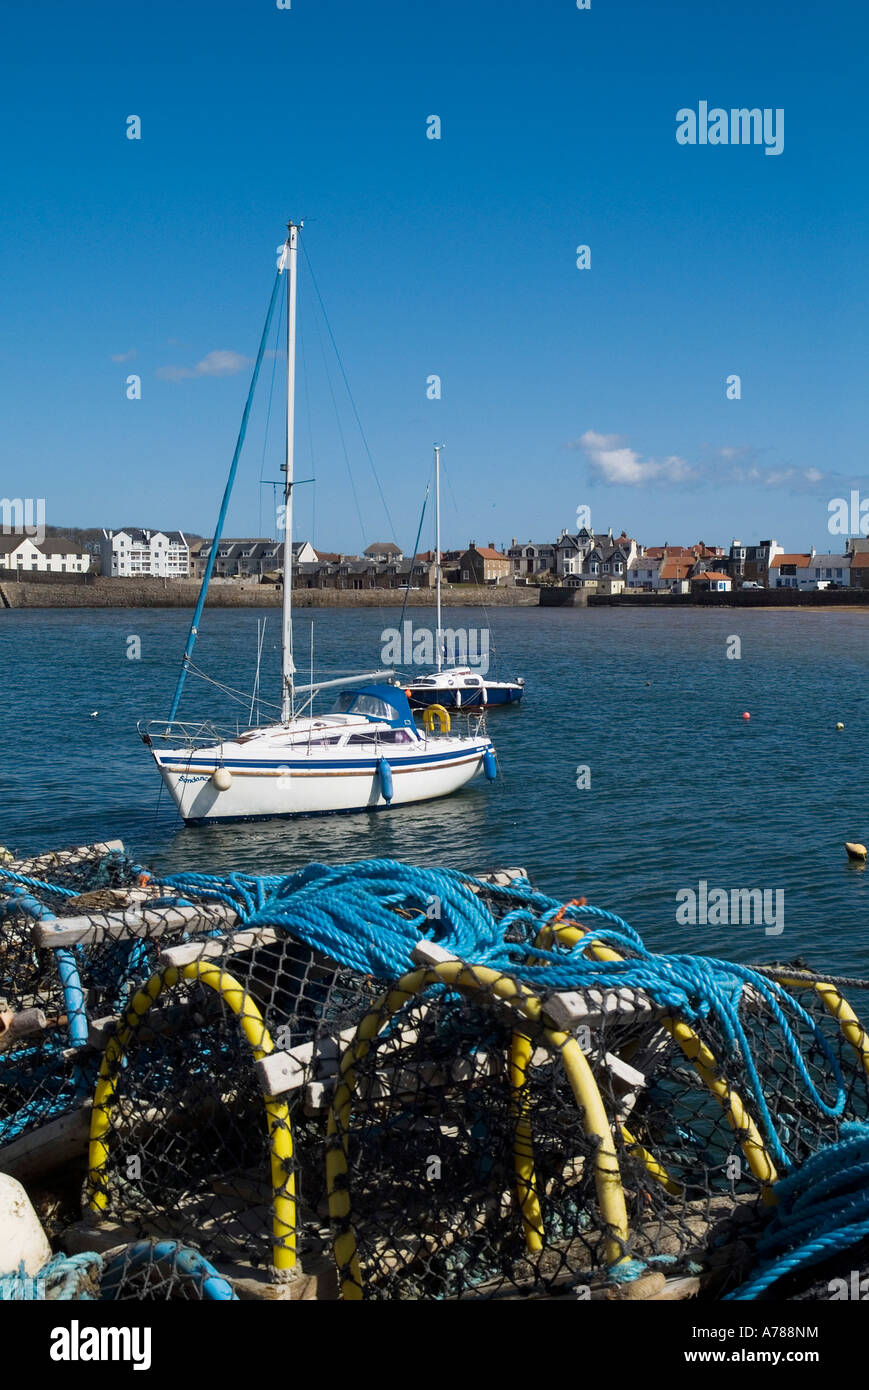 dh Harbour ELIE FIFE Crab lobster creels and yachts anchored in bay Stock Photo